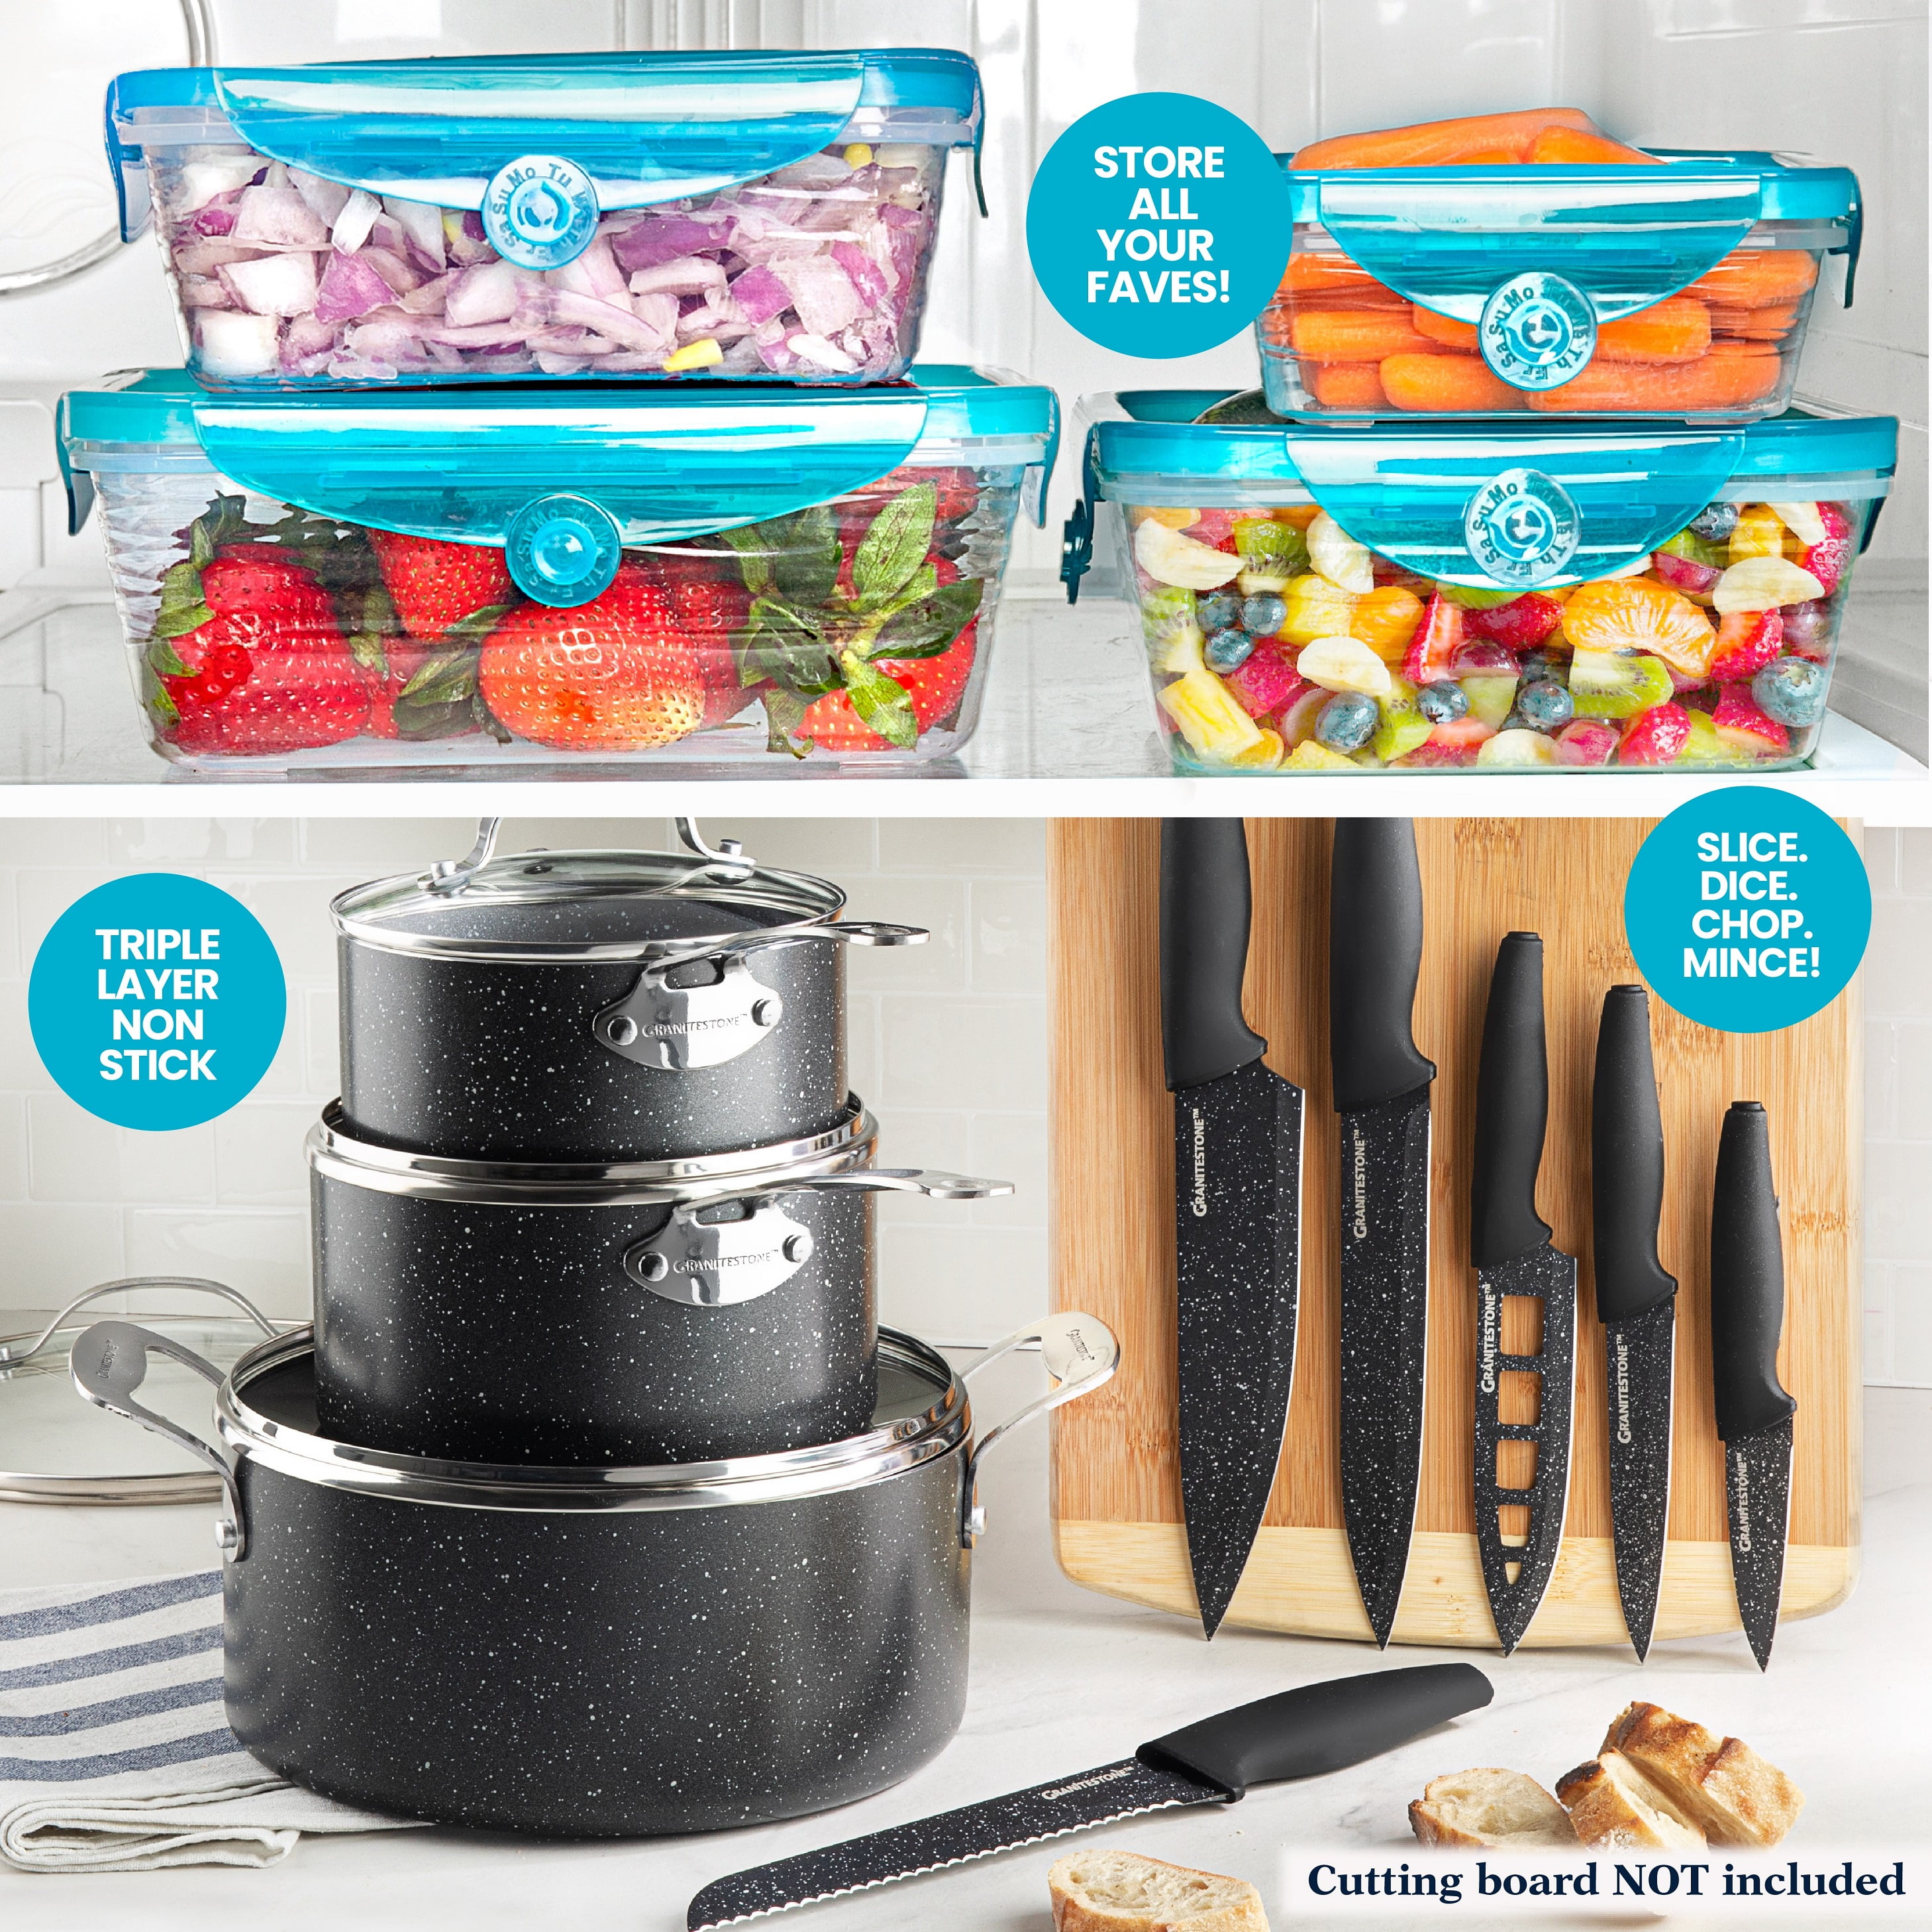 Granitestone 17 Piece Complete Nonstick Cookware Set - Includes 10 Piece Pots and Pans Set + 6 Piece Knife Set and 1 Cutting Board, 100% PFOA Free